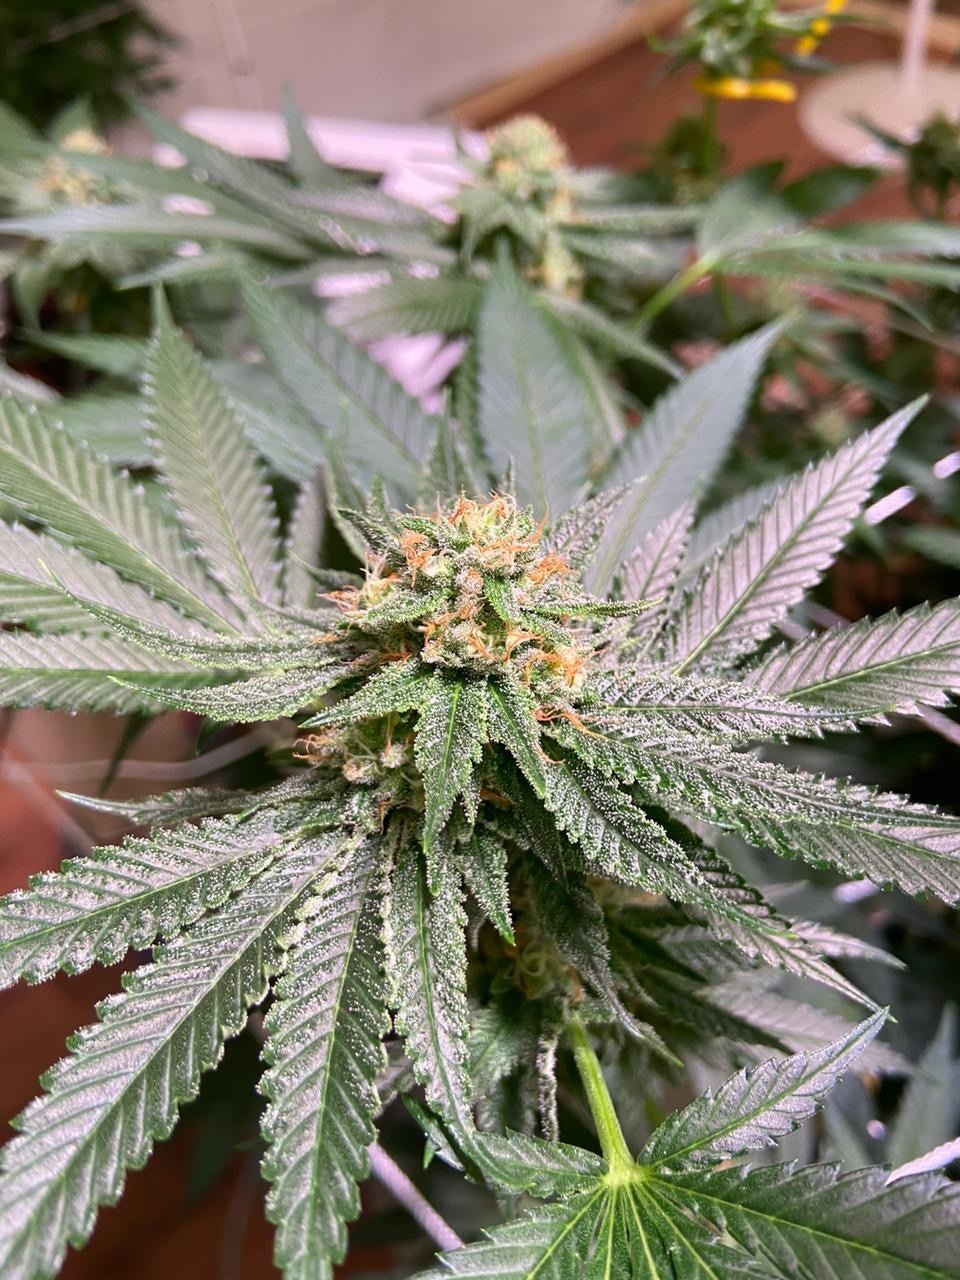 Pistils turning red to early week 4 flower 3